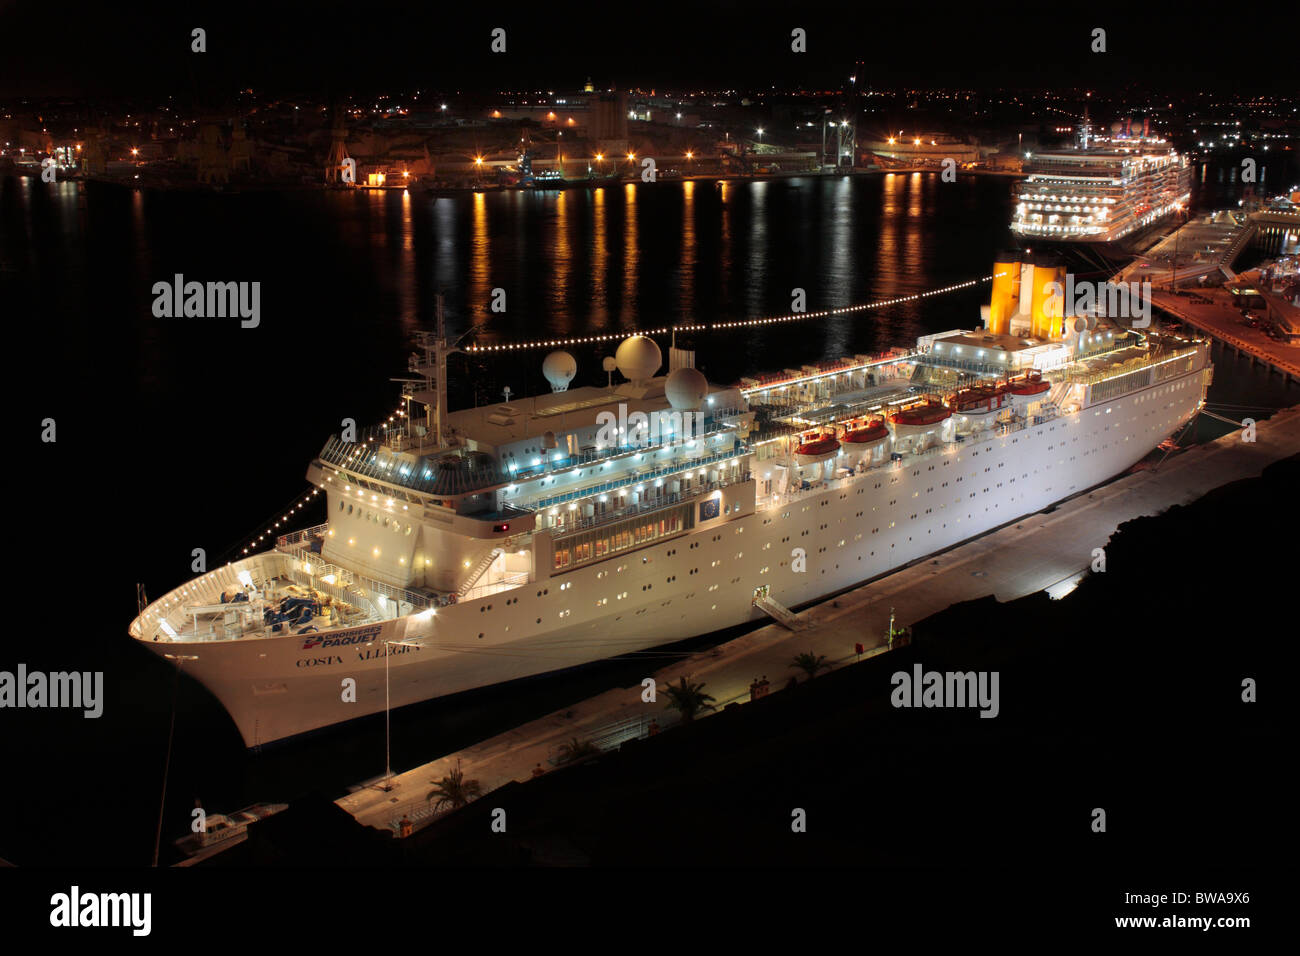 The cruise ship Costa Allegra in the Grand Harbour of Malta, a Mediterranean travel and tourism destination Stock Photo